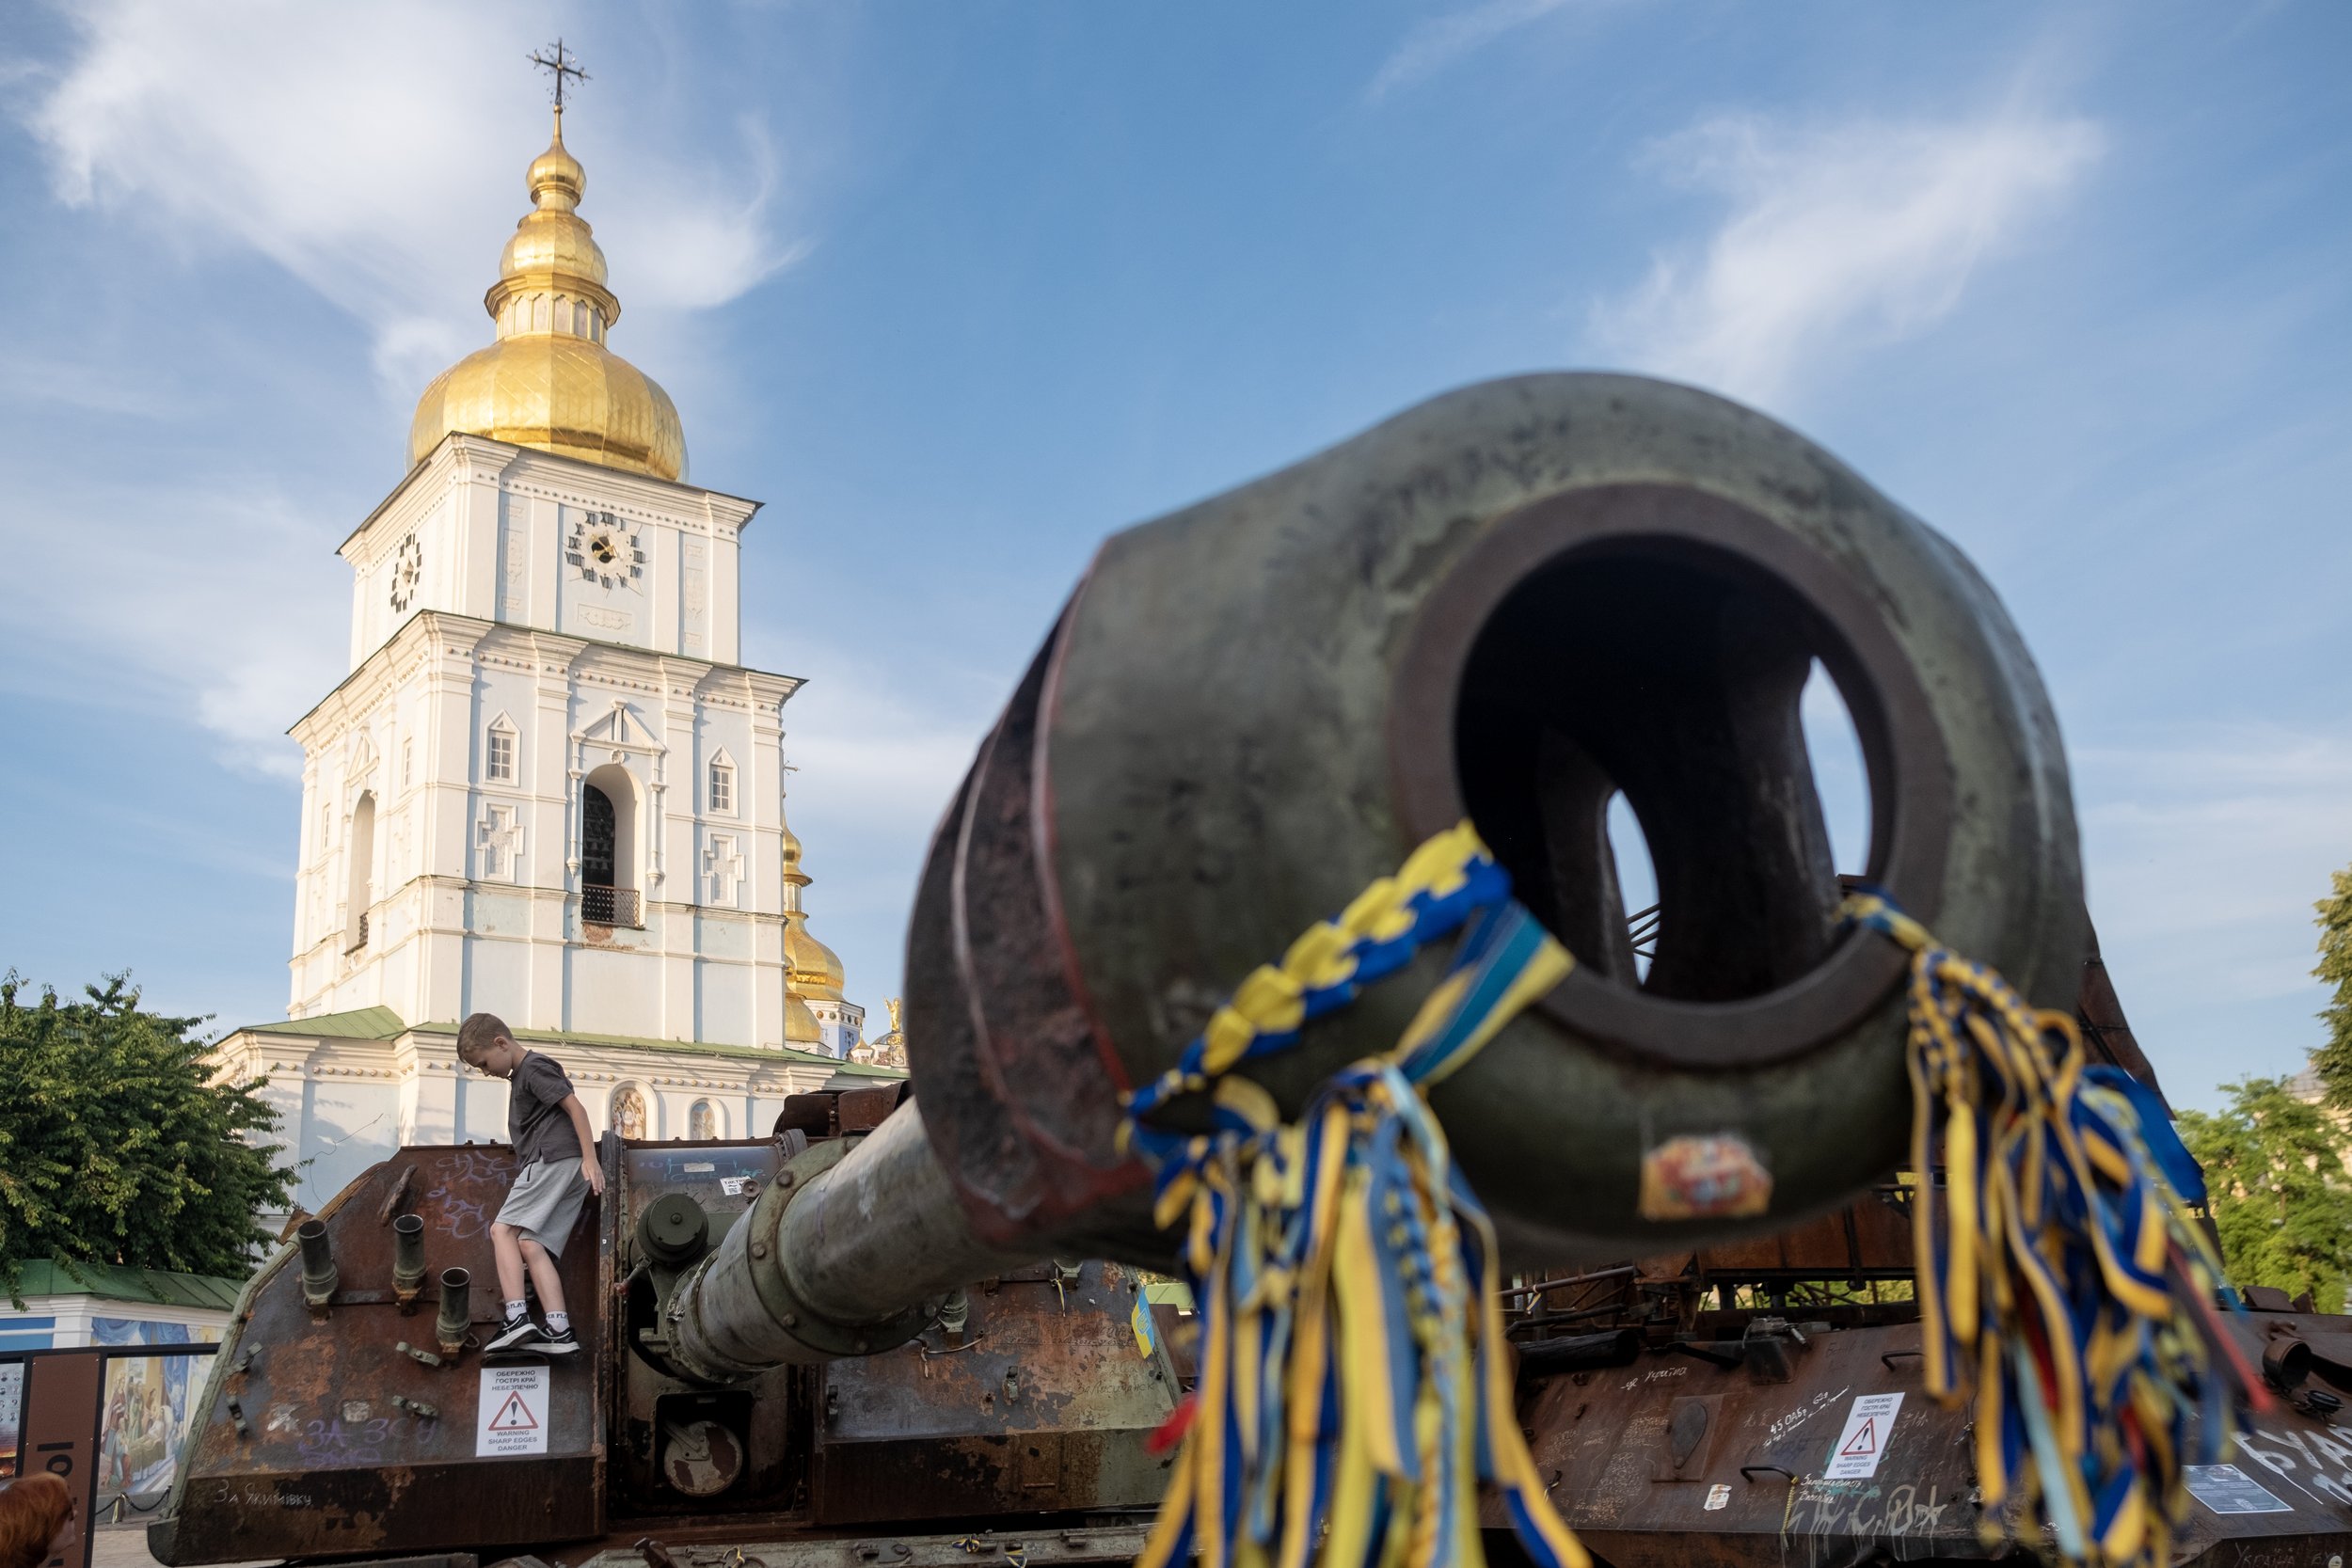  A young boy climbs atop the remains of a destroyed Russian tank on display in Mykhailivska Square in Kyiv, Ukraine on June 18, 2023. Captured and destroyed pieces of Russian military equipment are put on display in Kyiv for civilians to come and exa